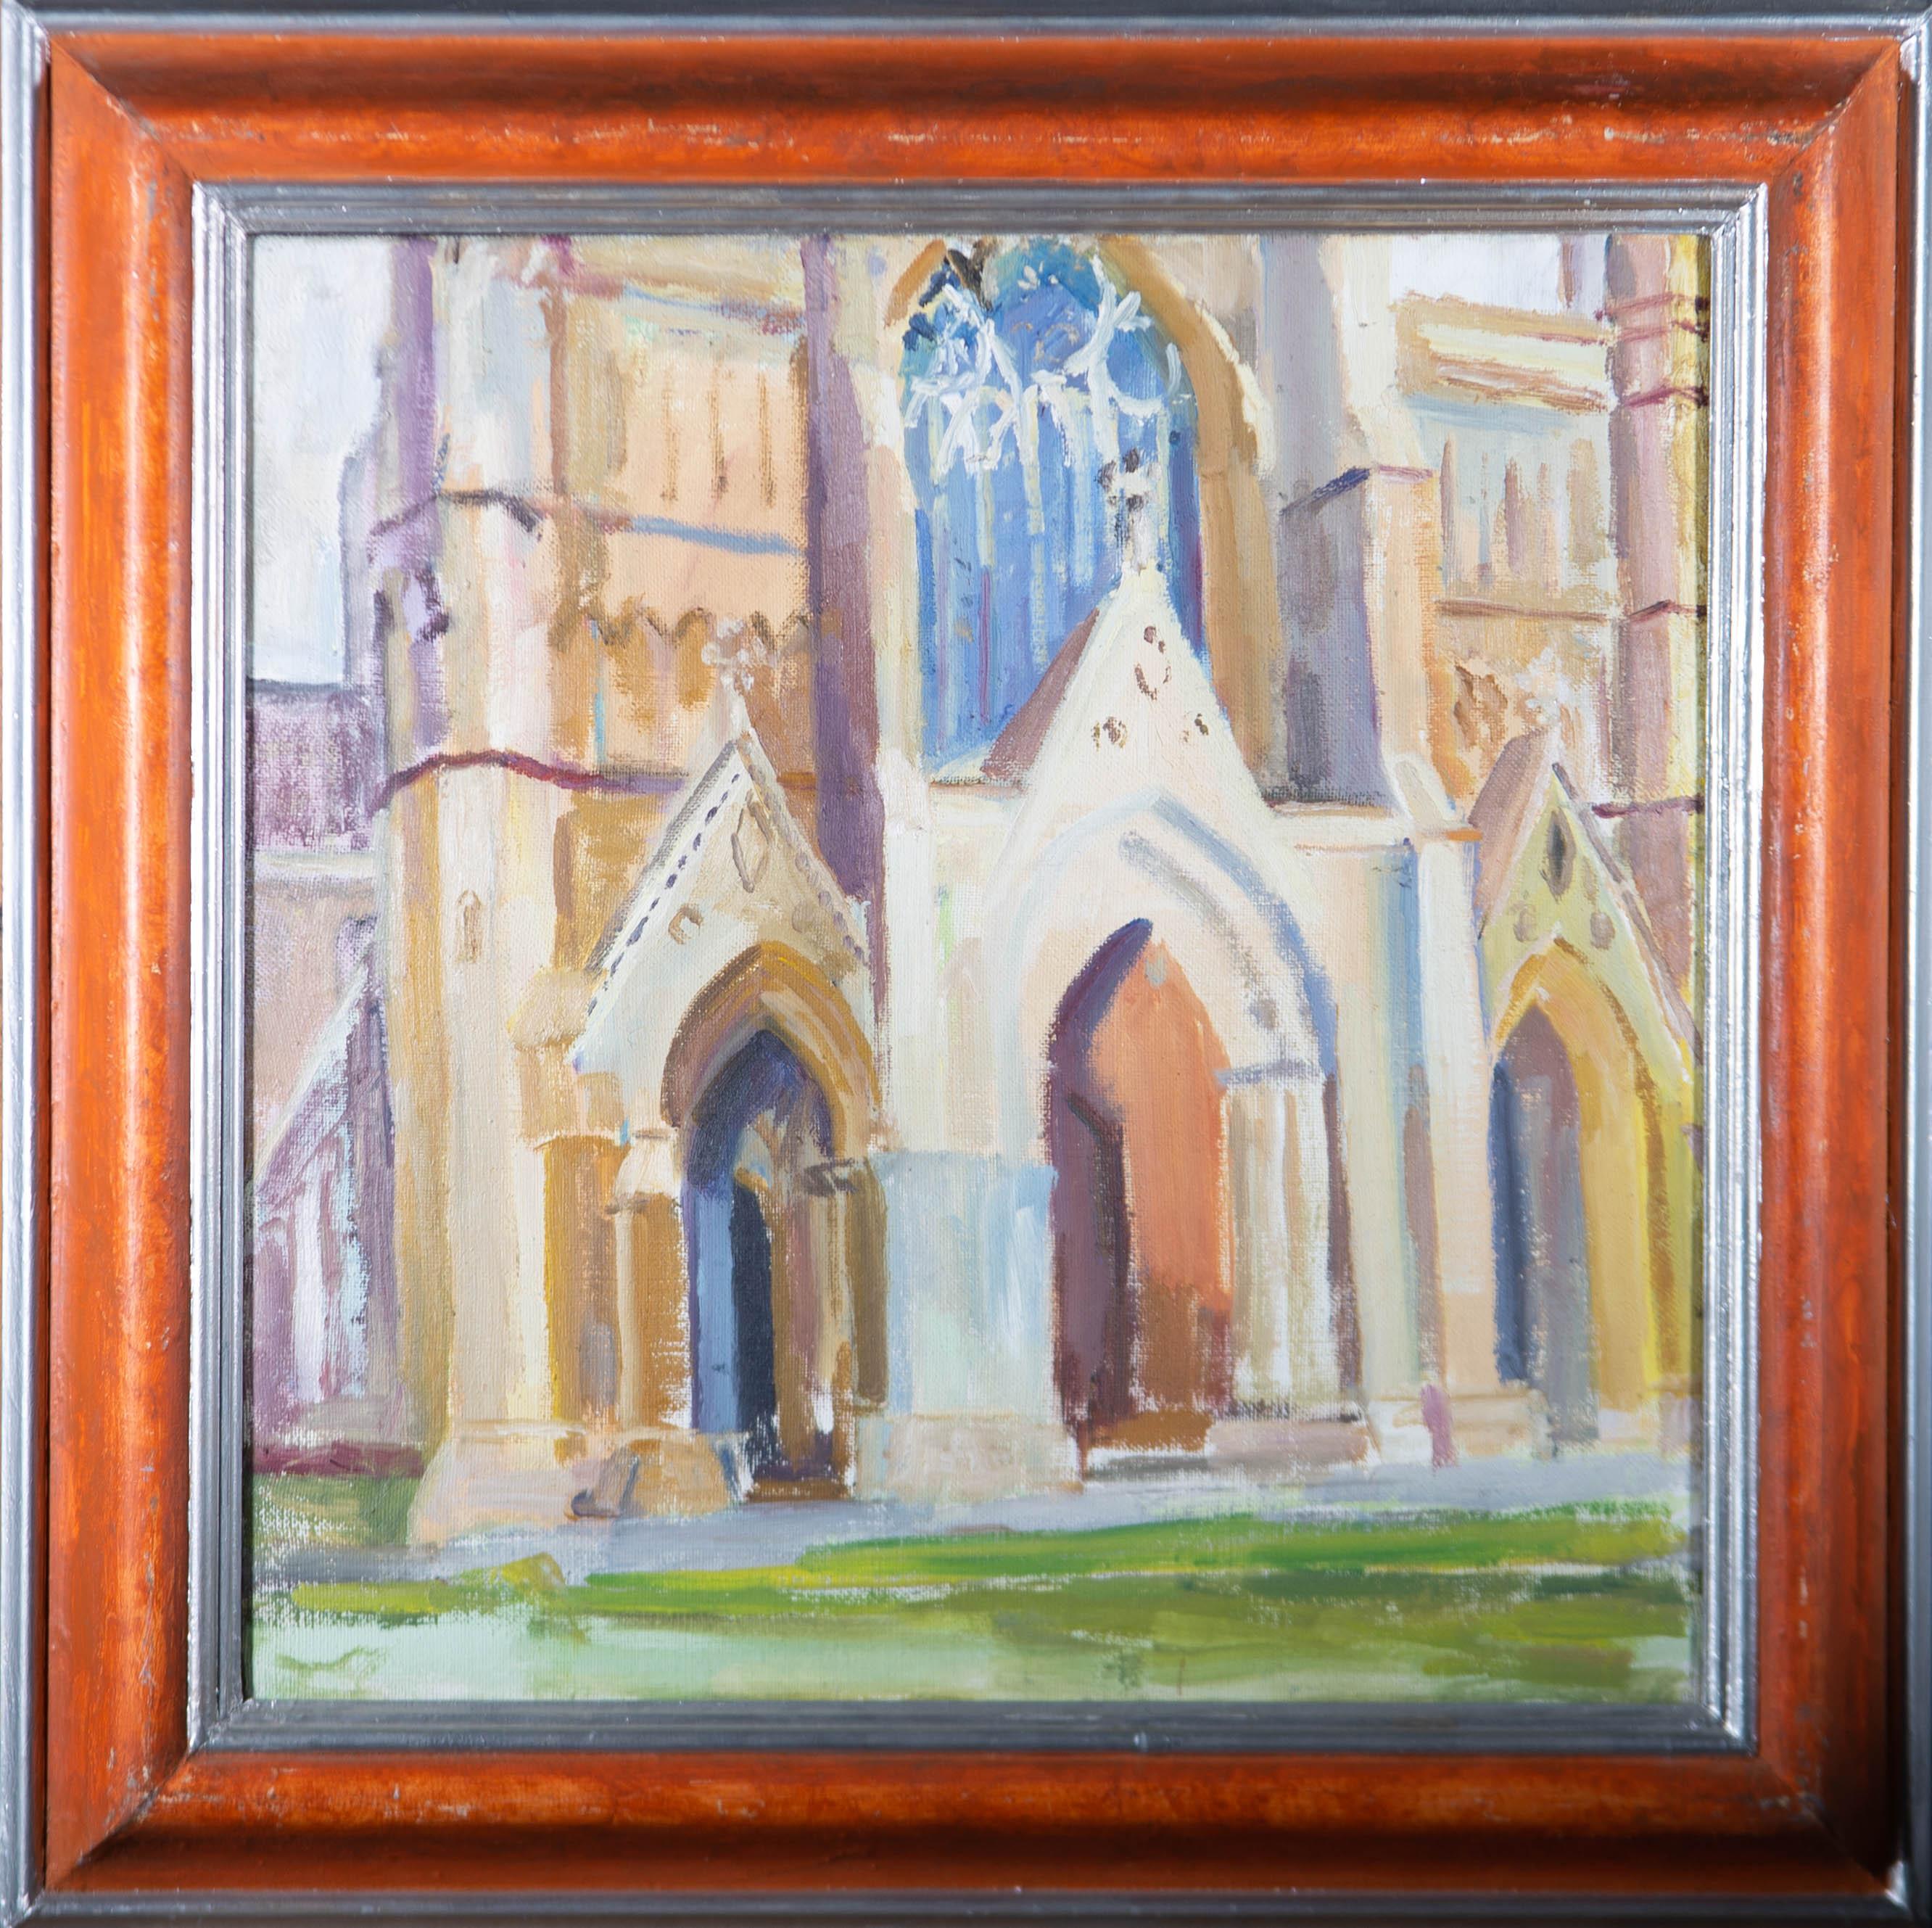 A vibrant oil painting by the artist Pamela Chard, depicting a view of a cathedral. Unsigned. Presented in a painted wooden frame, as shown. On canvas on stretchers.
